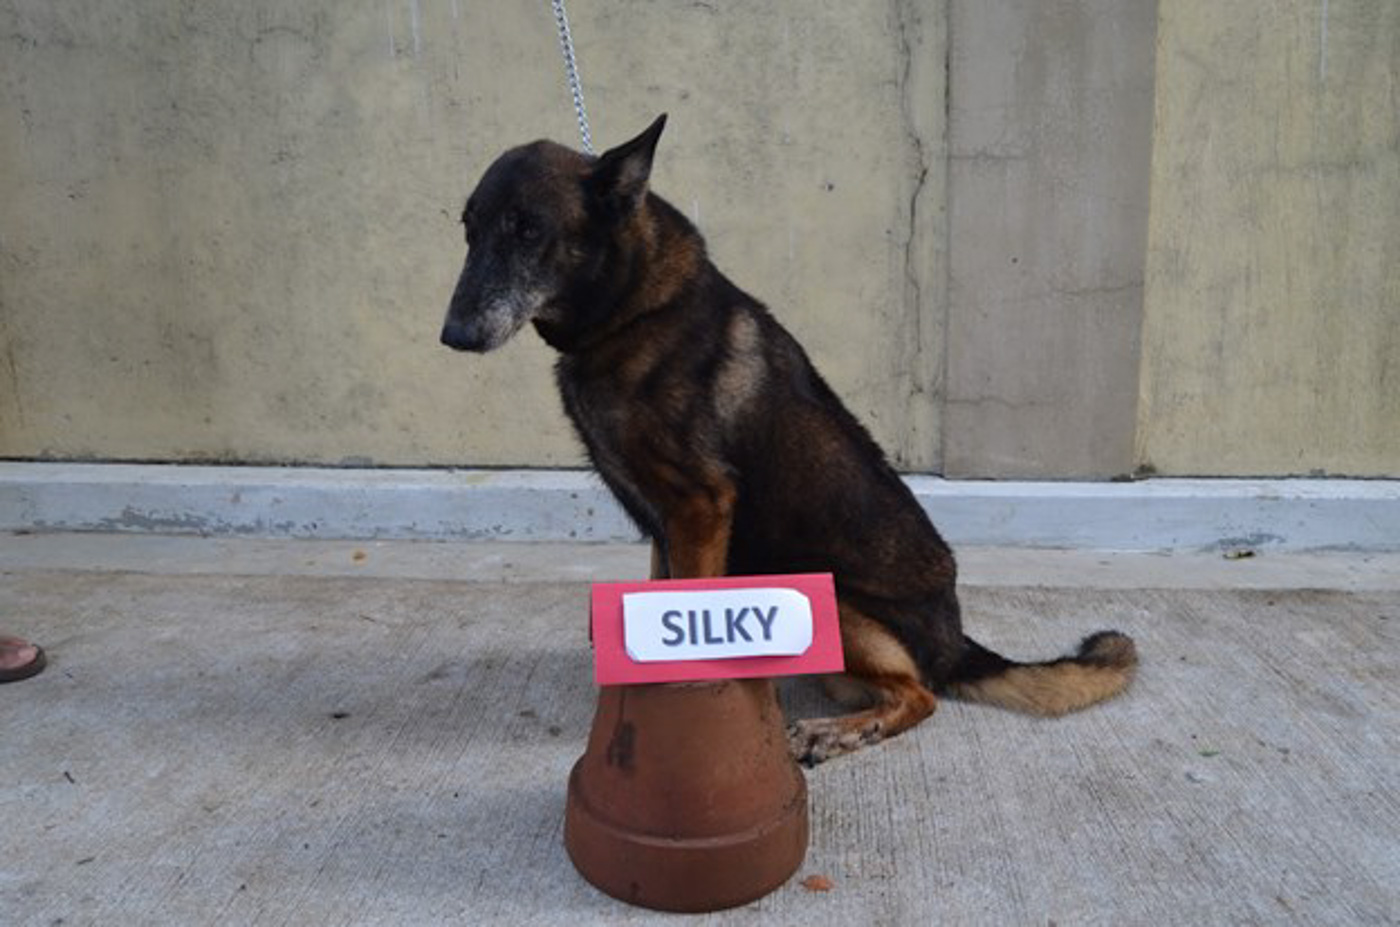 Want to adopt a K9? Look at these PDEA dogs